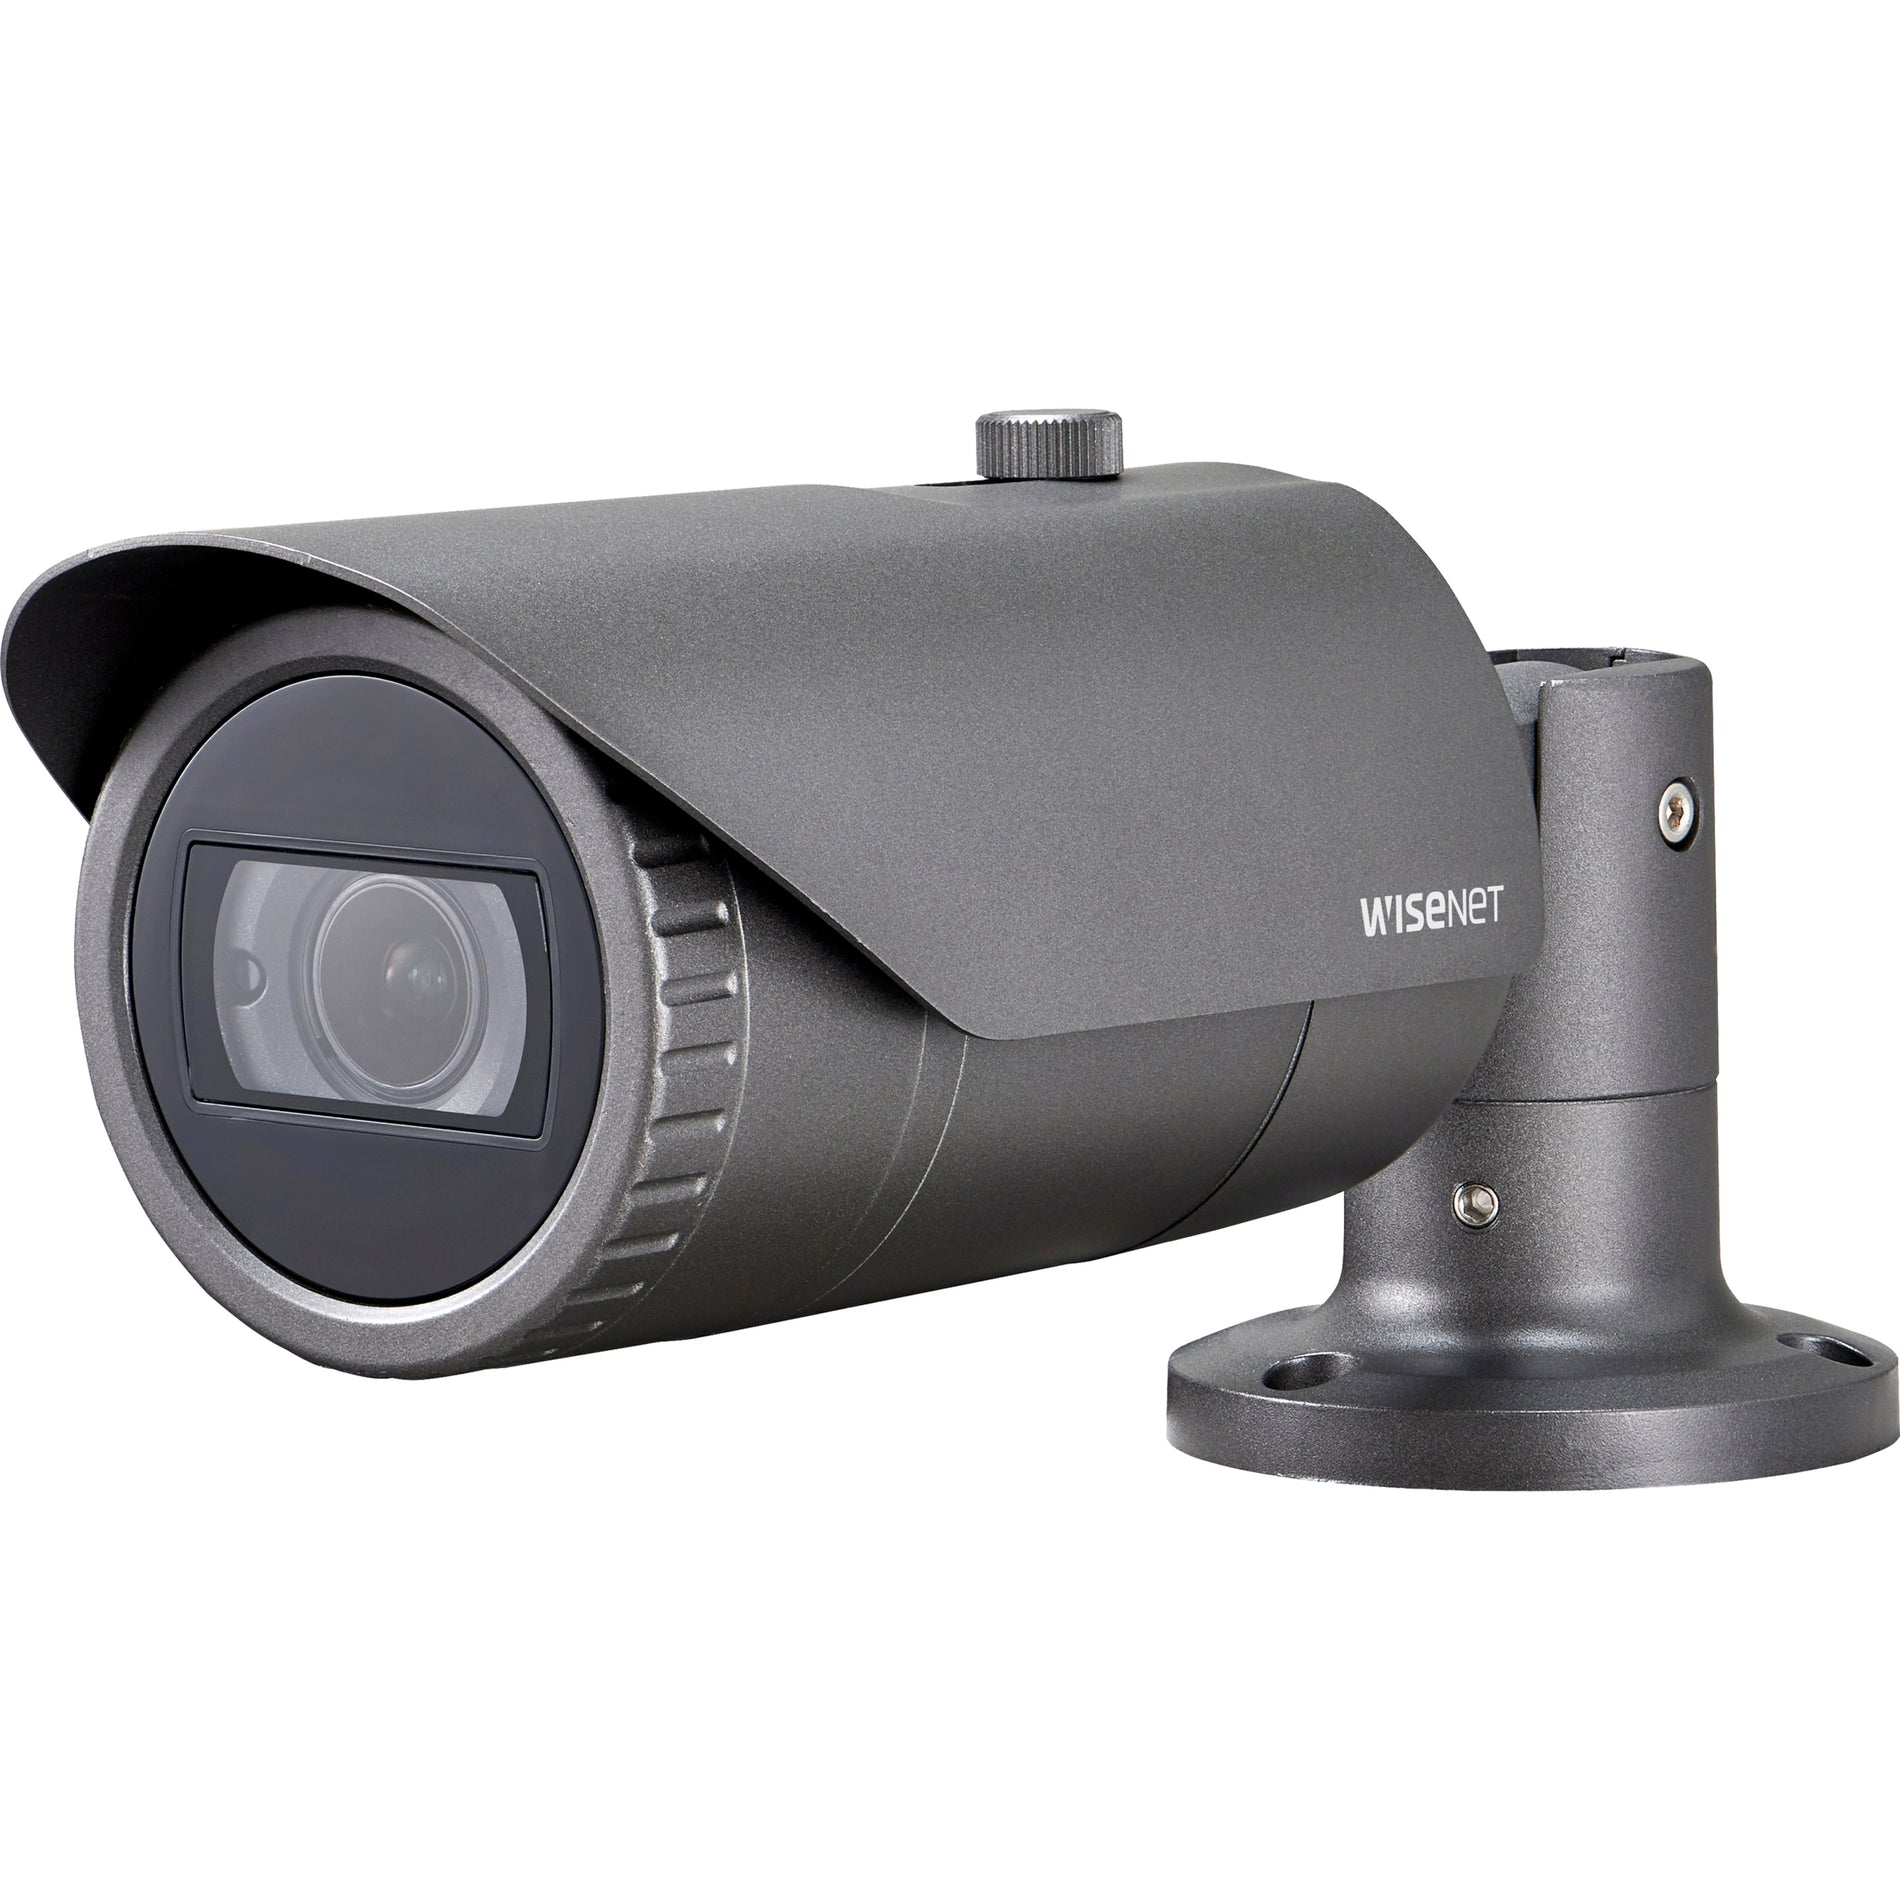 Wisenet Q QNO-6082R 2 MP Network IR Bullet Camera with Motorized Varifocal Lens, Outdoor Vandal Proof, 98ft Night Vision